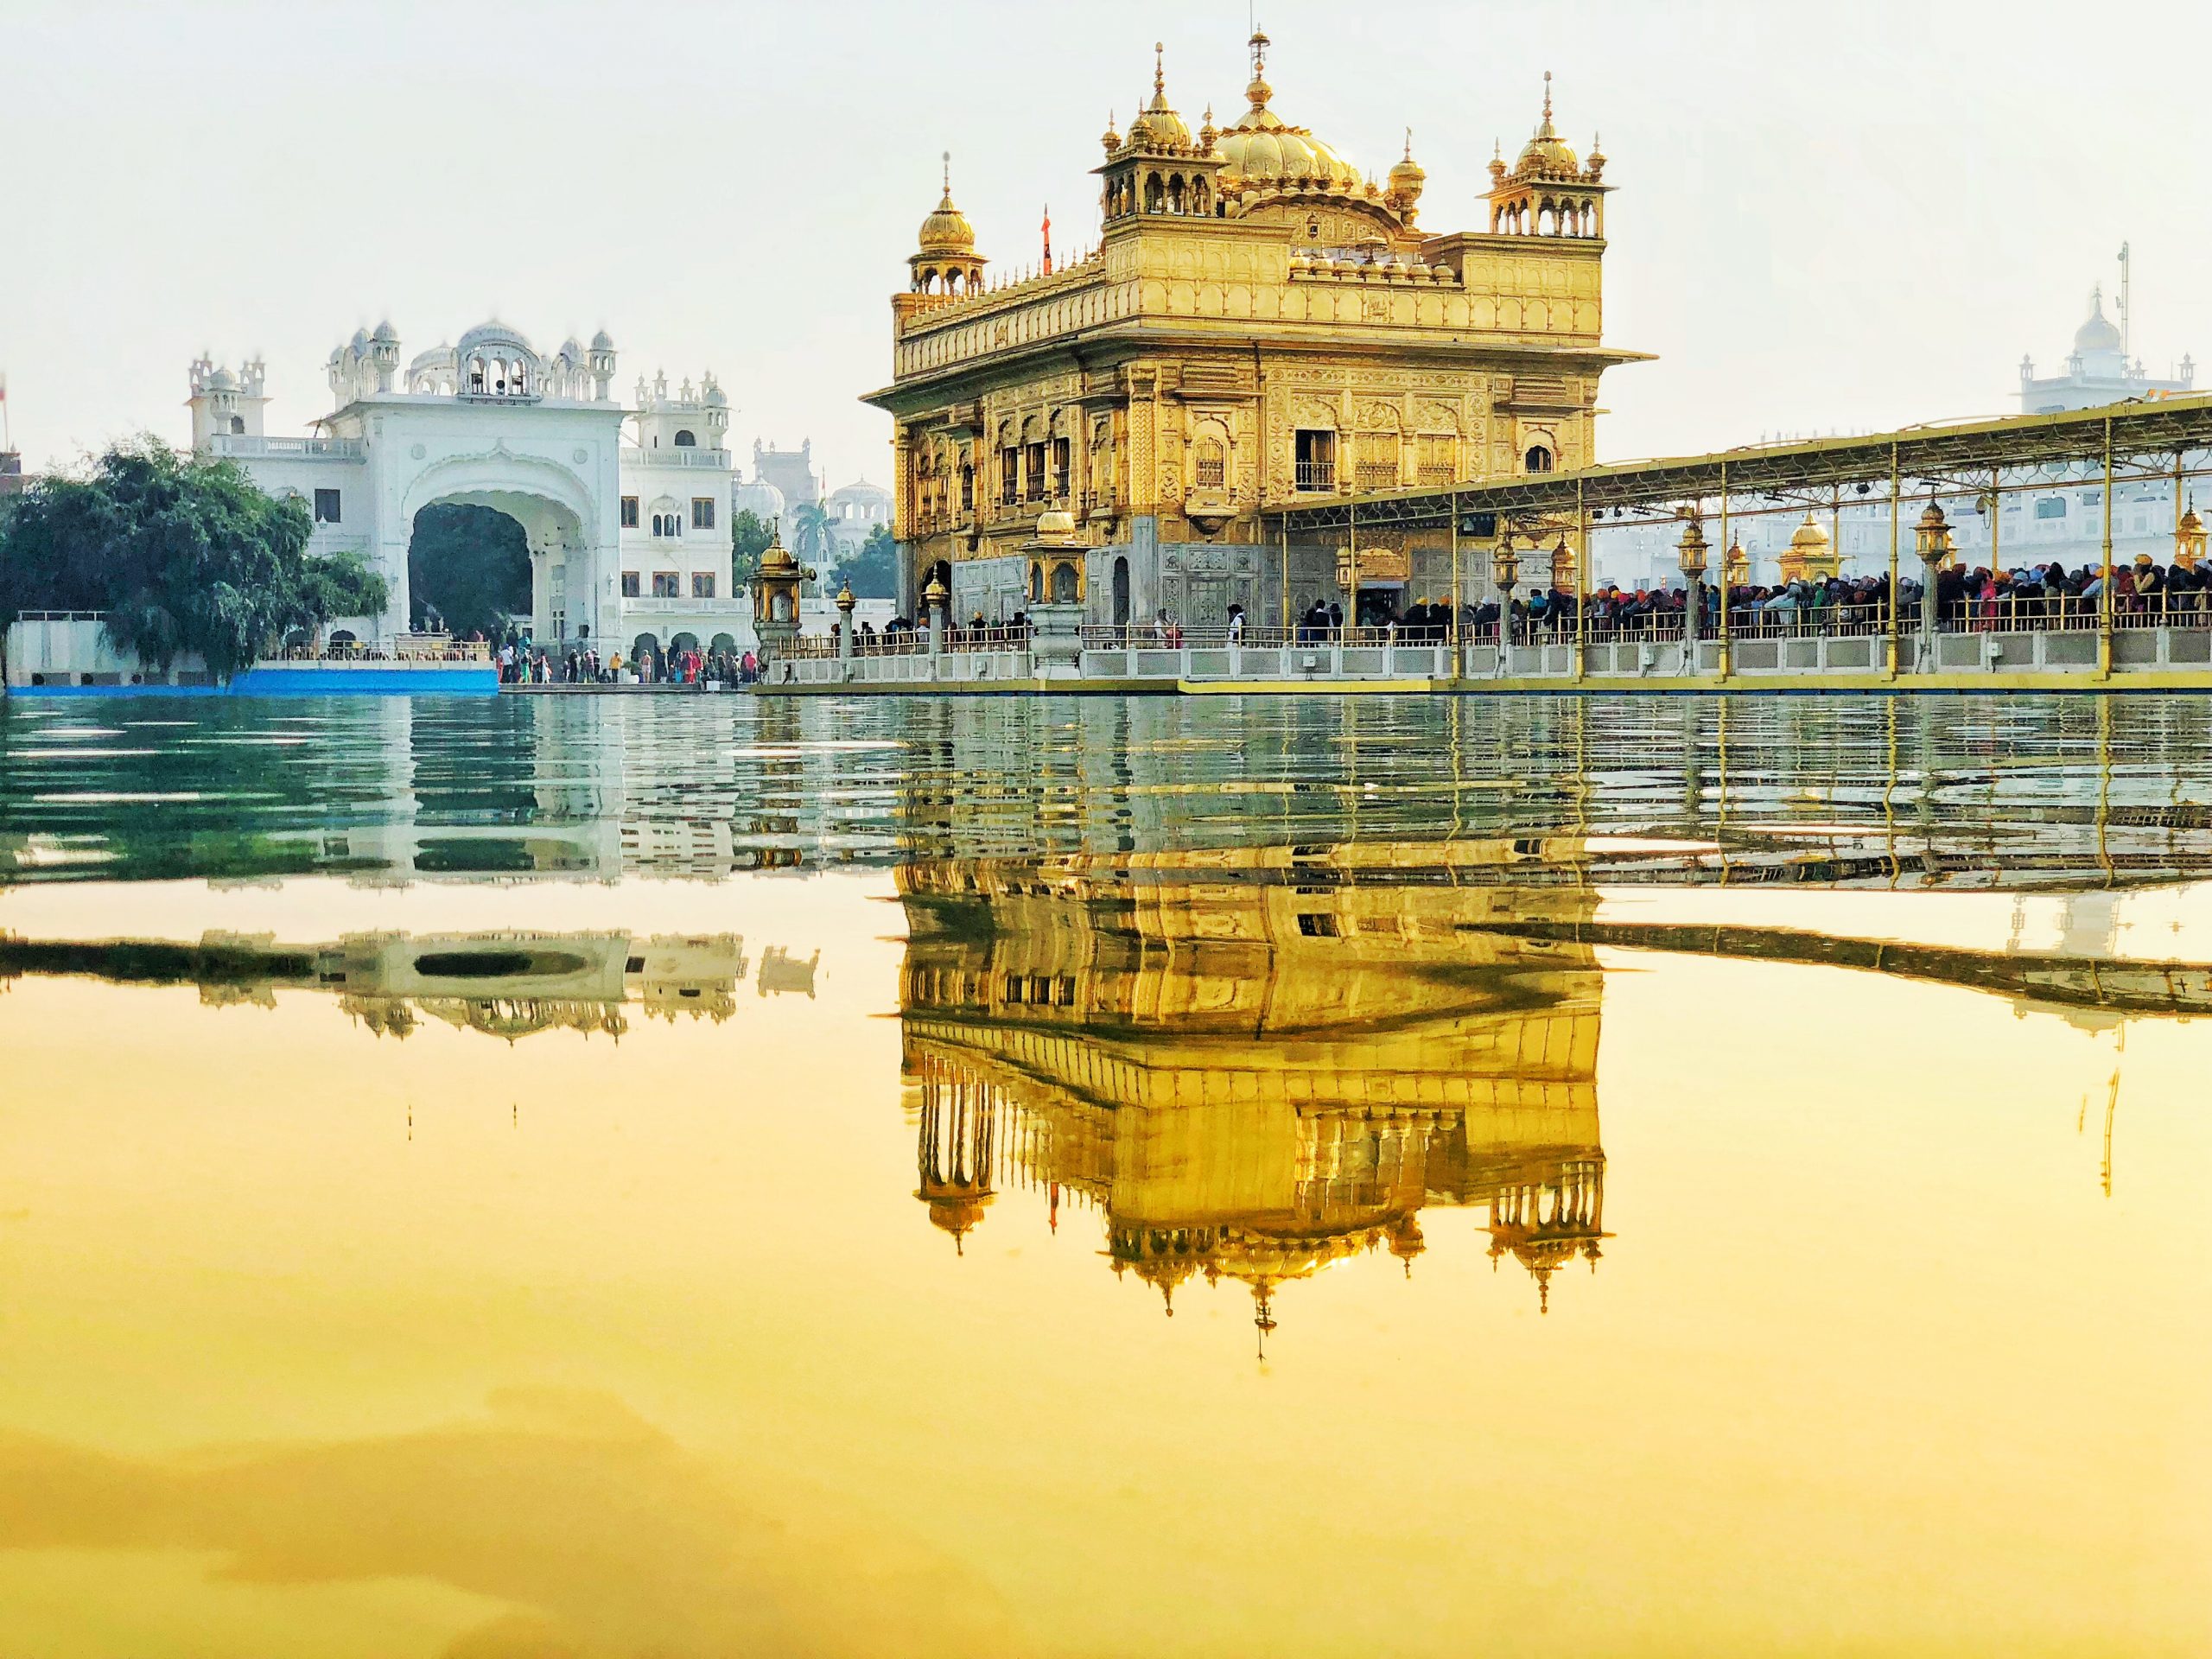 The city of Amritsar is famous for which holy destination?